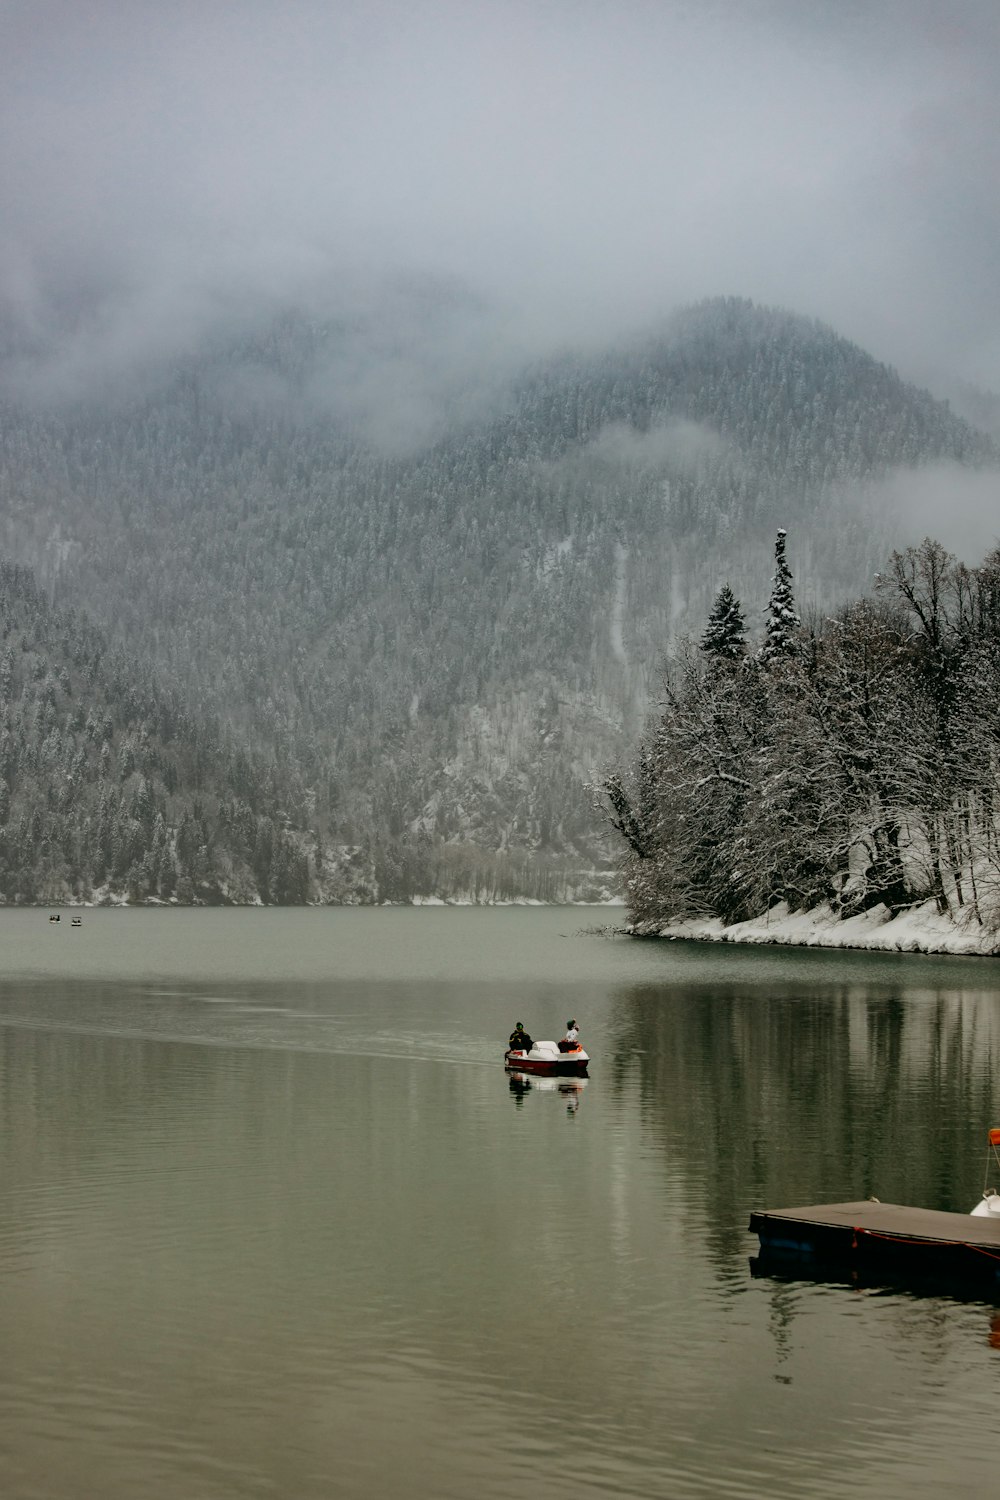 a group of people in a boat on a lake with trees and snow